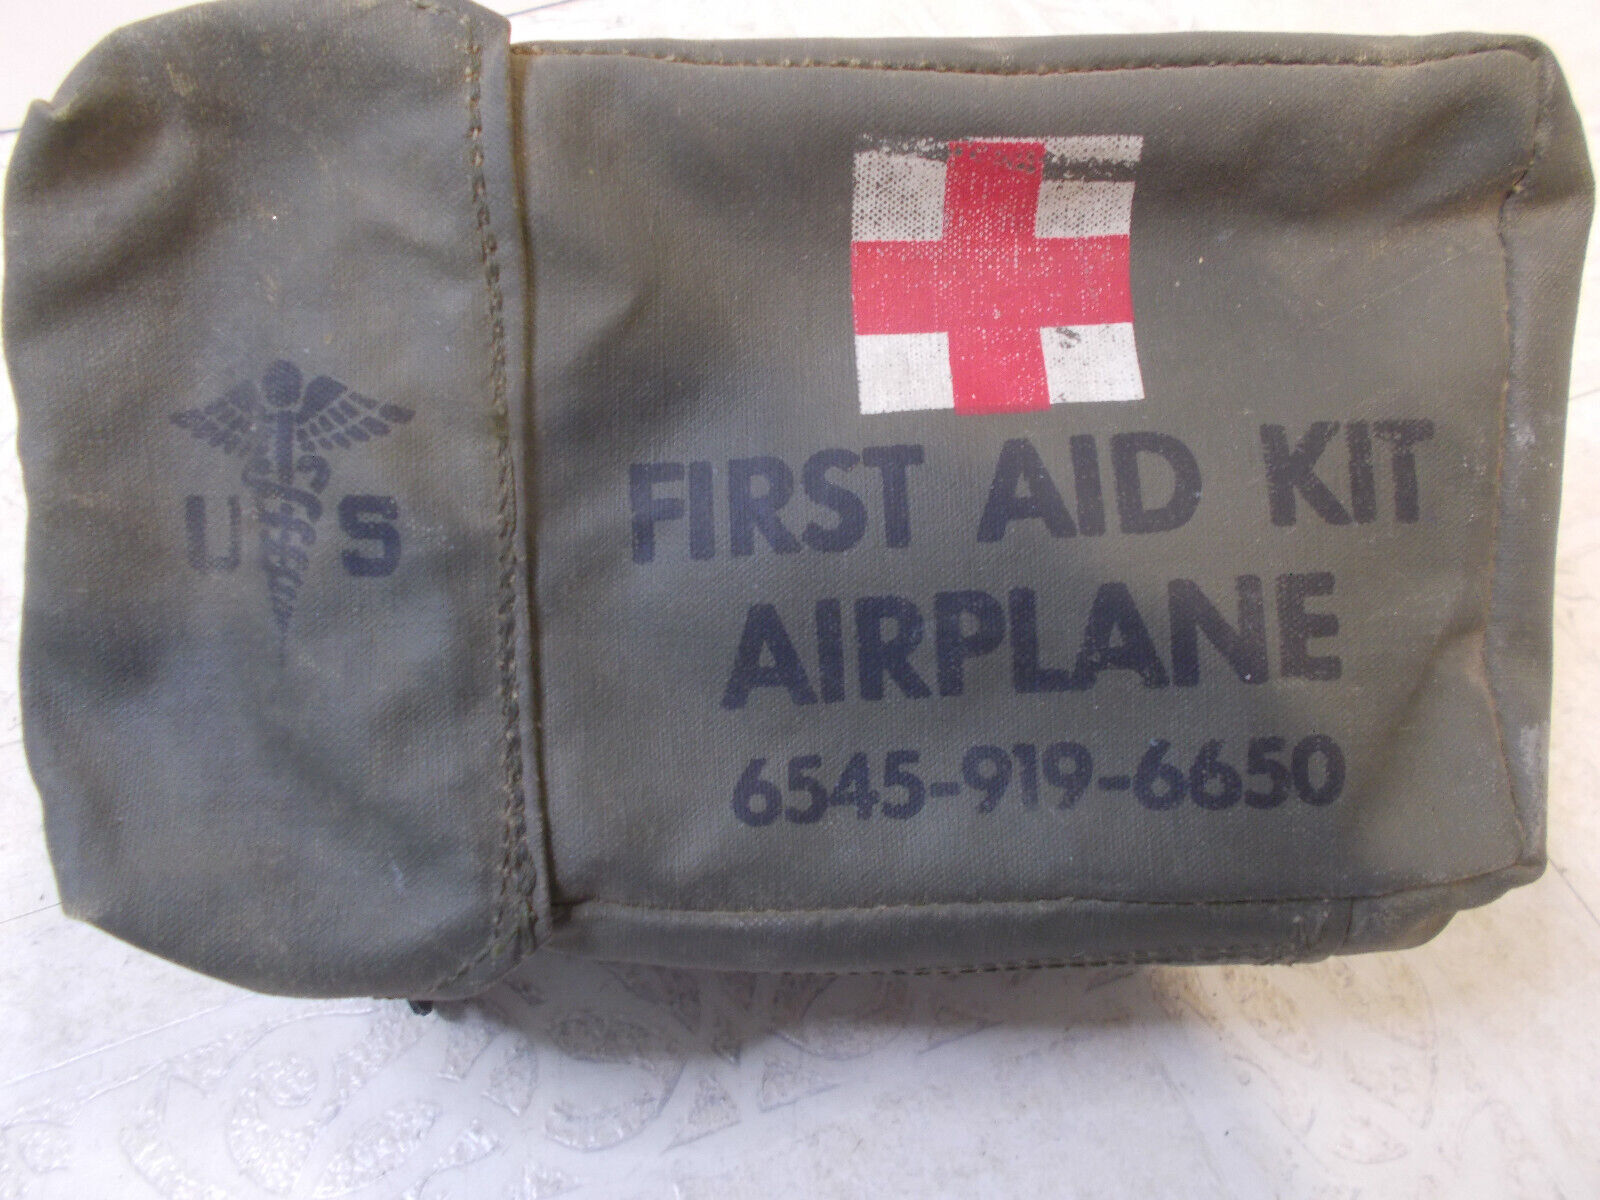 Vintage Airplane First Aid Kit US Military WWII? with a Few Original Contents